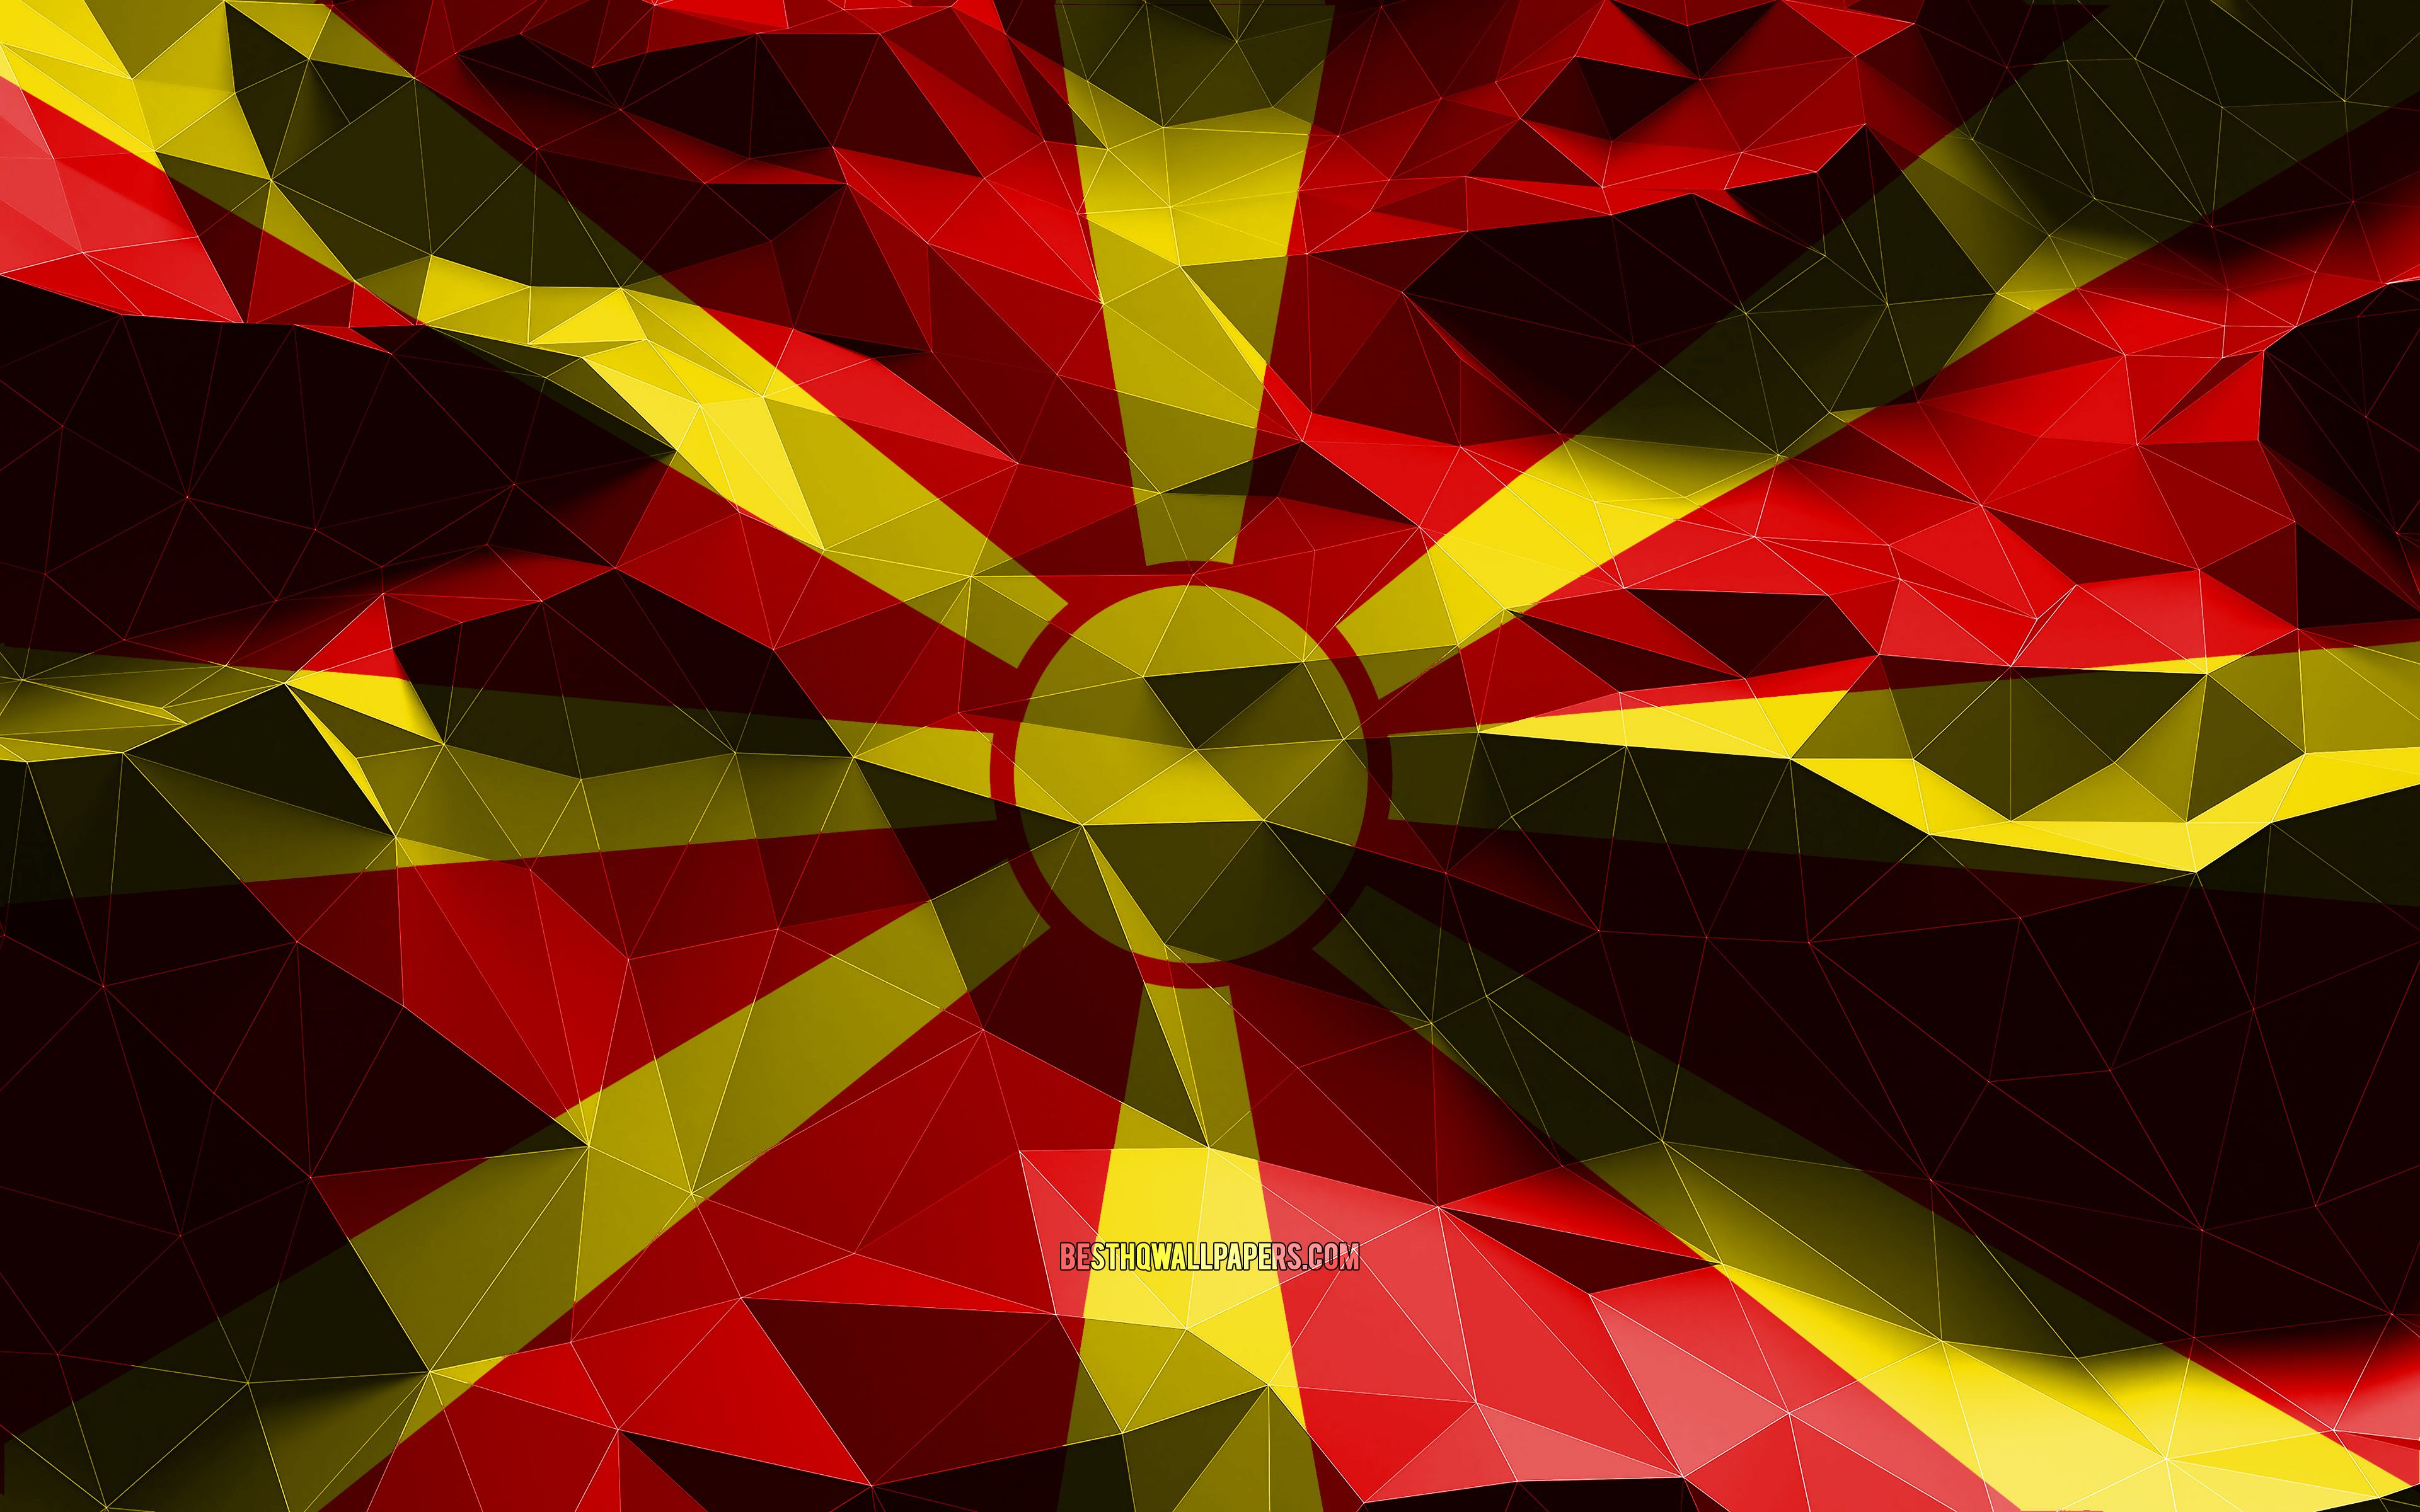 Download wallpaper 4k, Macedonian flag, low poly art, European countries, national symbols, Flag of North Macedonia, 3D flags, North Macedonia flag, North Macedonia, Europe, North Macedonia 3D flag for desktop with resolution